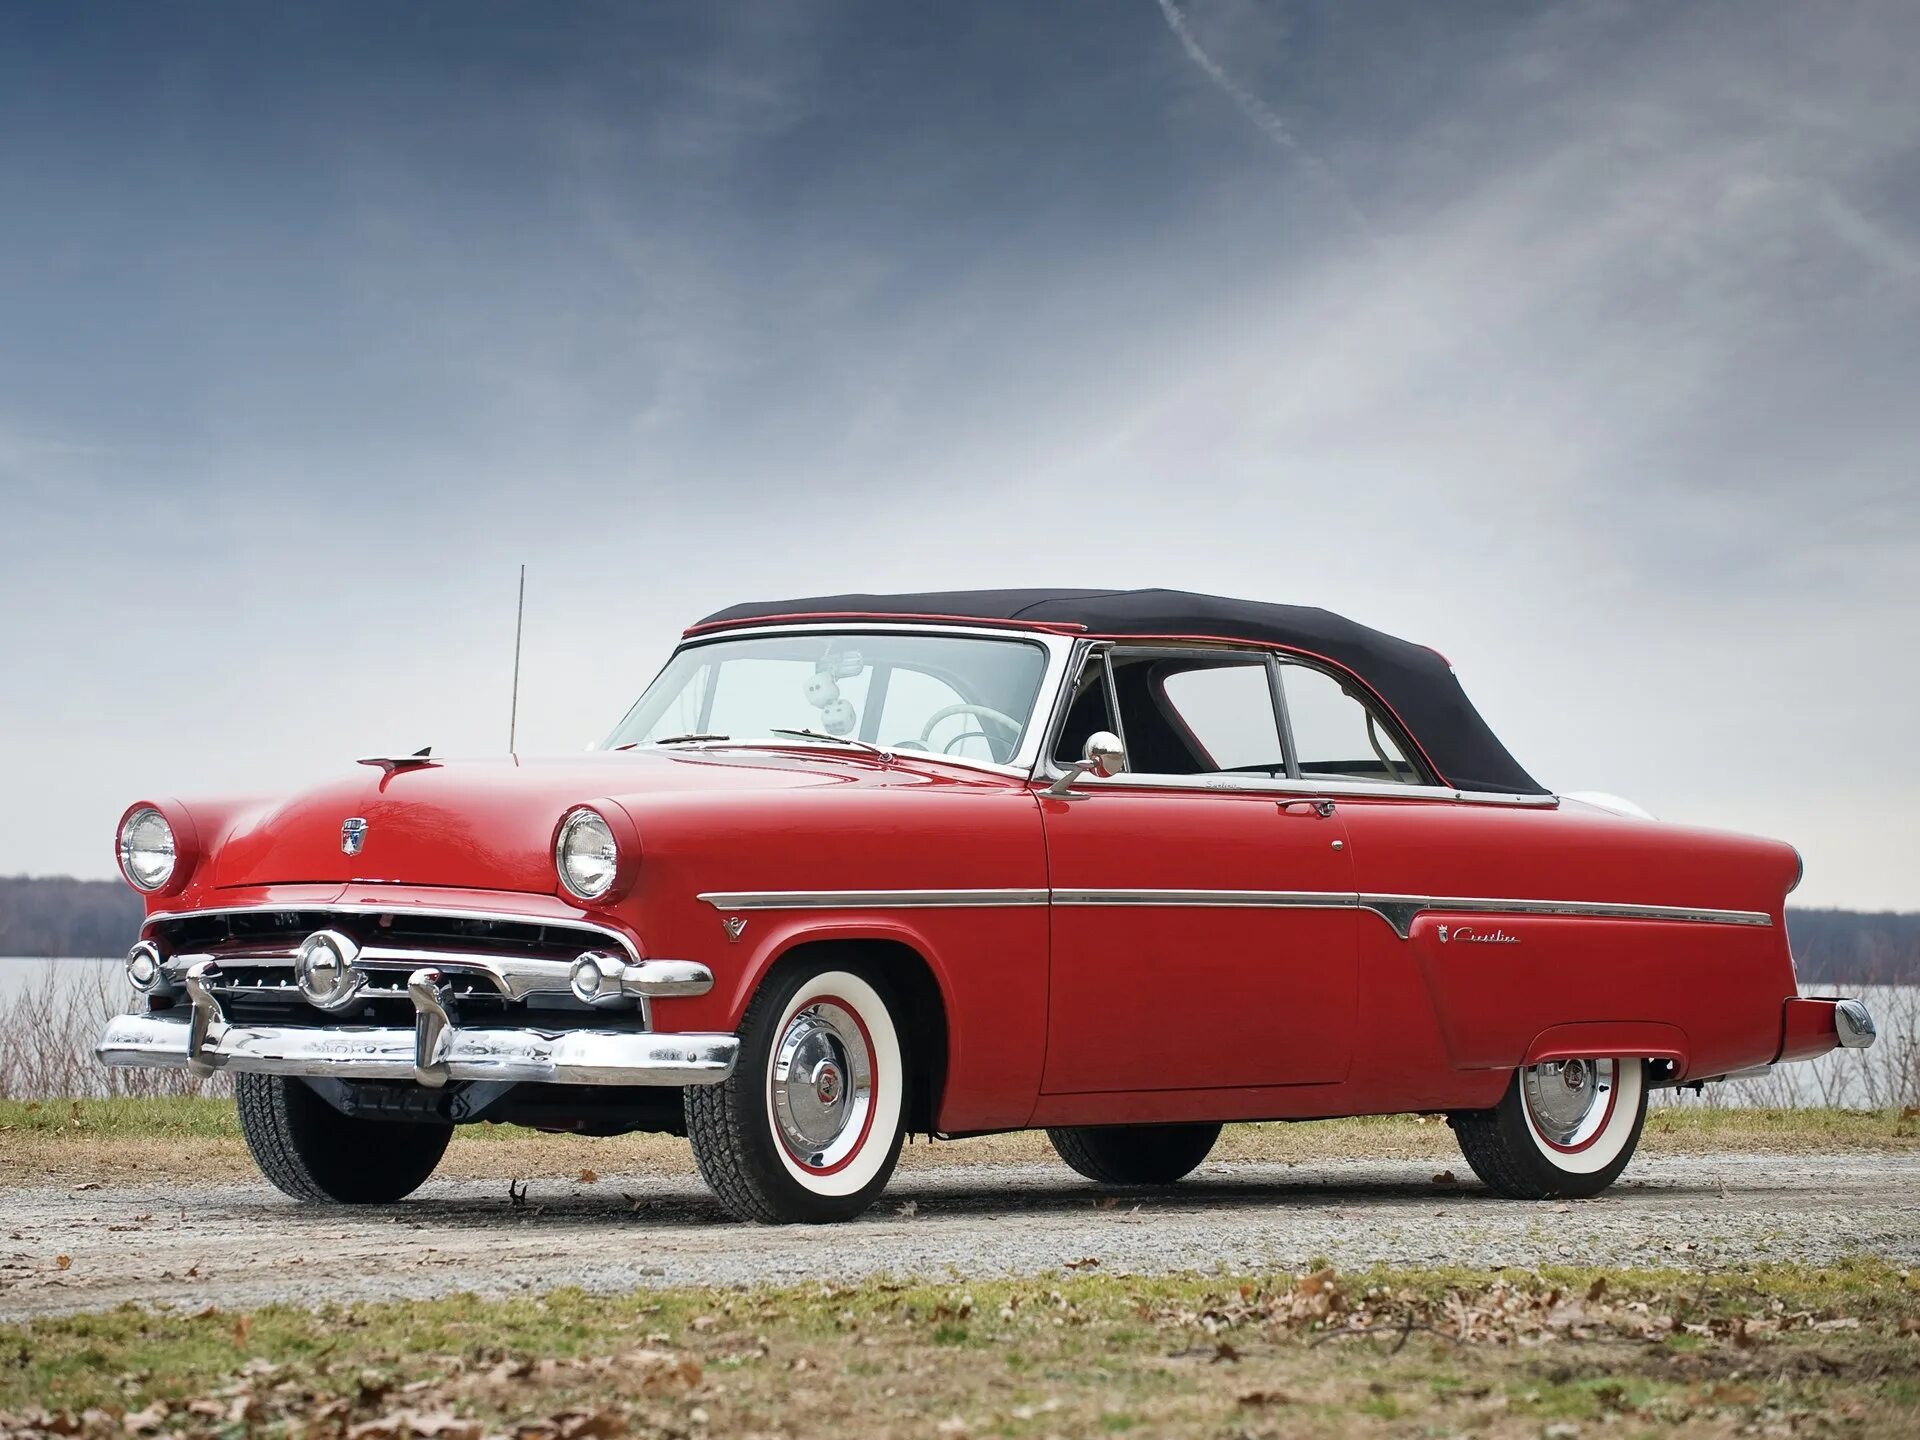 Best old cars. Ford Sunliner 1954. Форд Санлайнер. 1954 Ford Crestline Sunliner Convertible. Форд Санлайнер 1954 кабриолет.